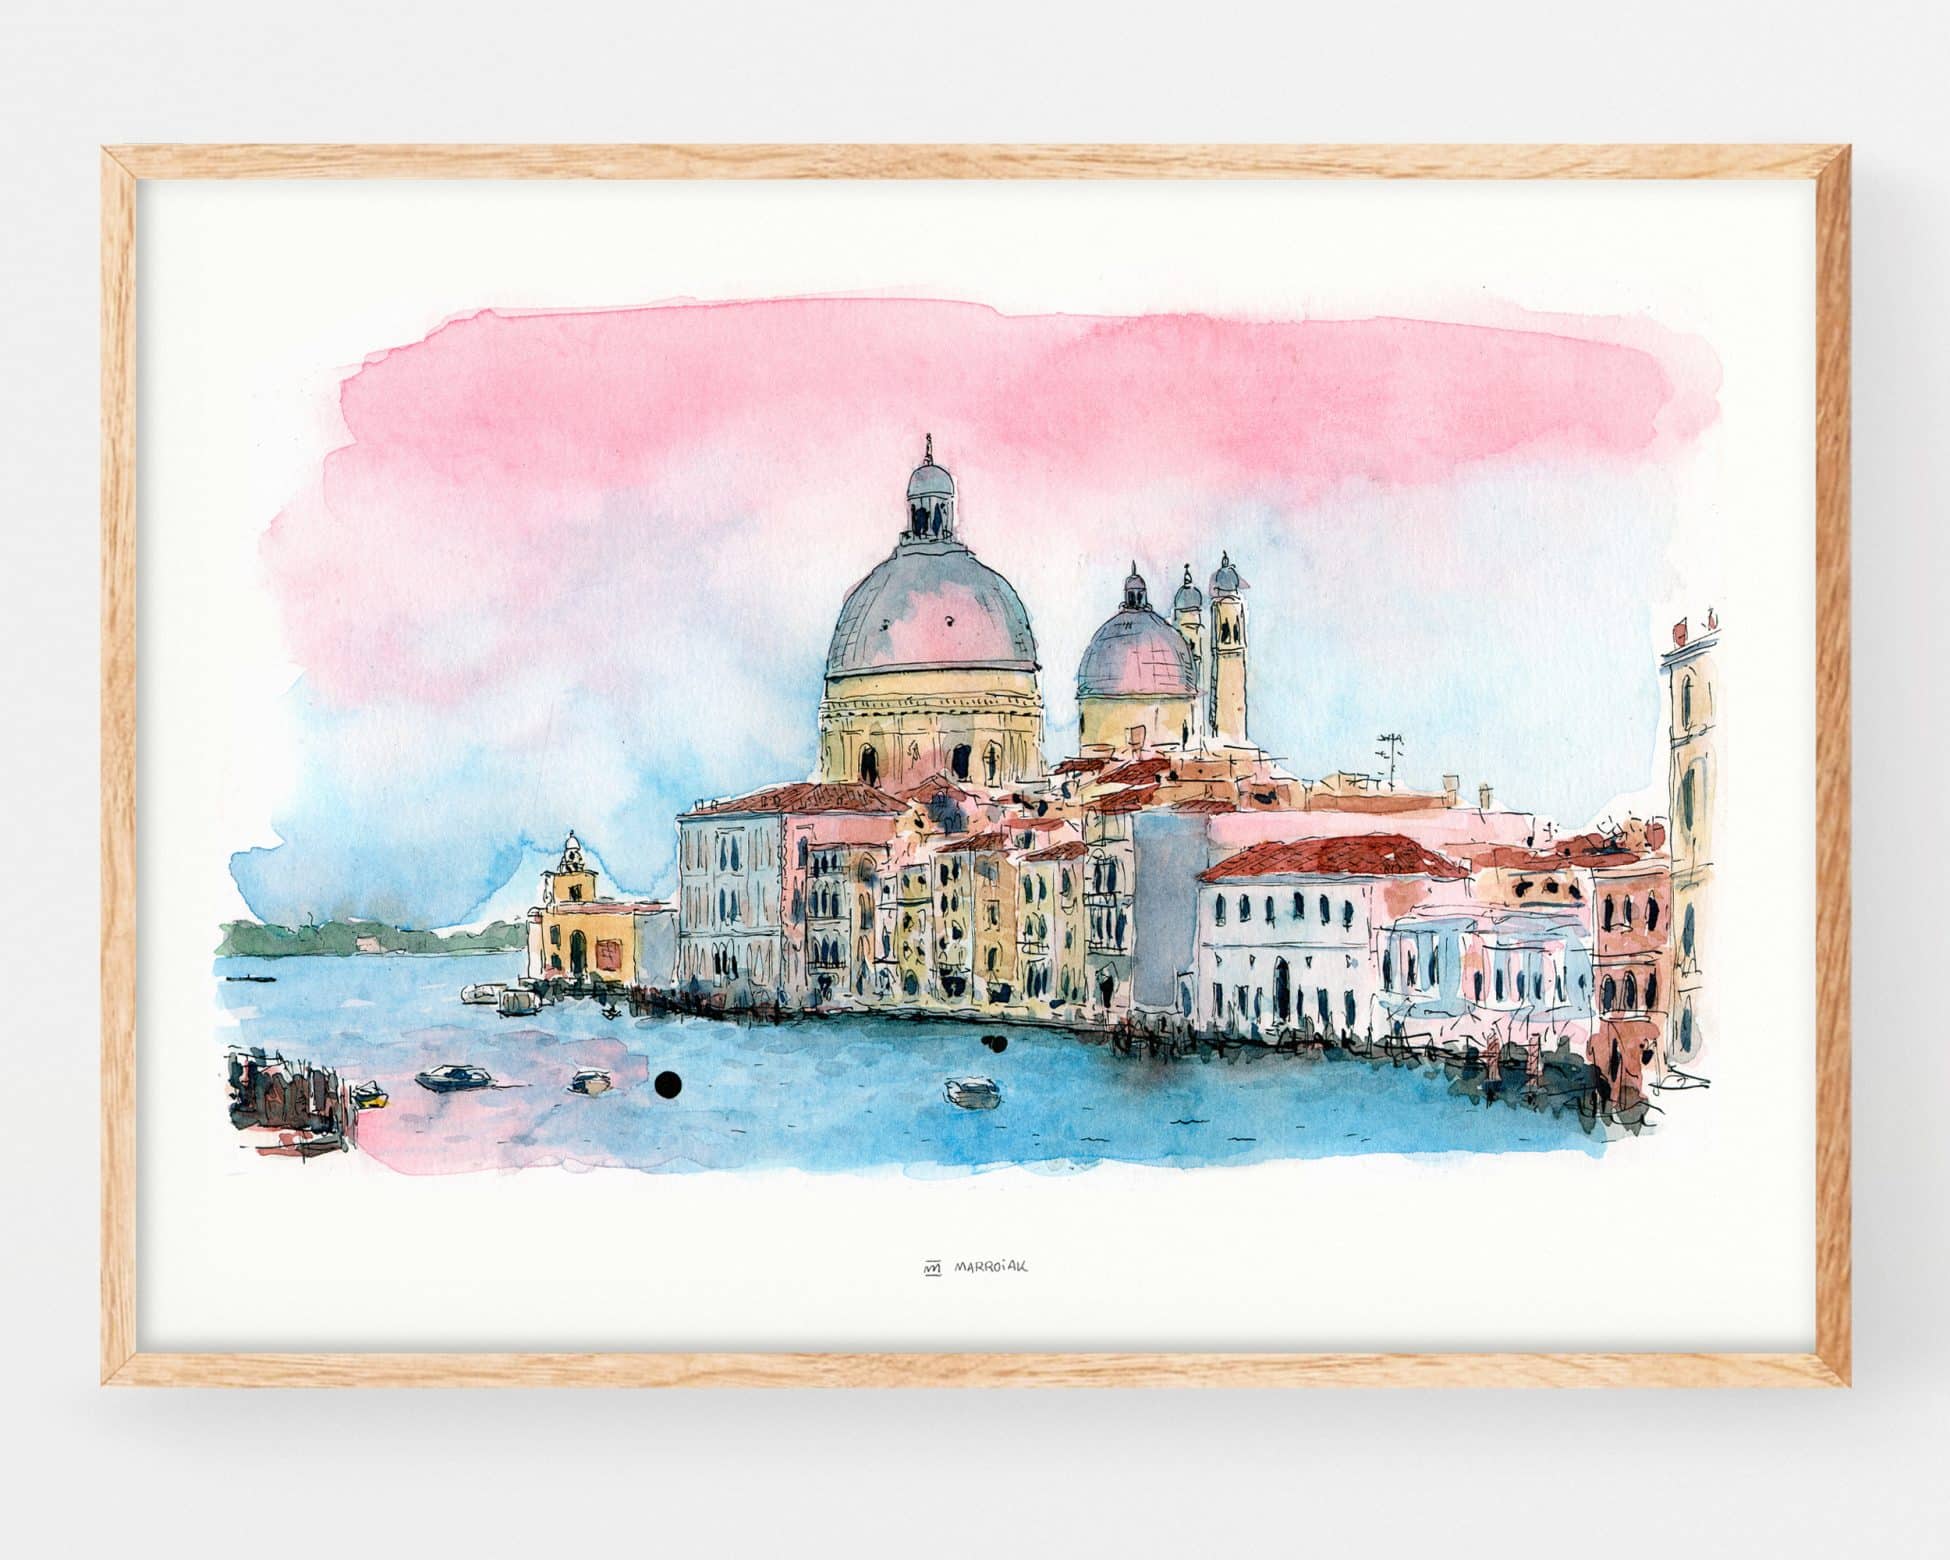 Grand Canal (Venice) watercolor wall art print. Souvenir illustration posters of Italy. Original and exclusive paintings ready to be framed.